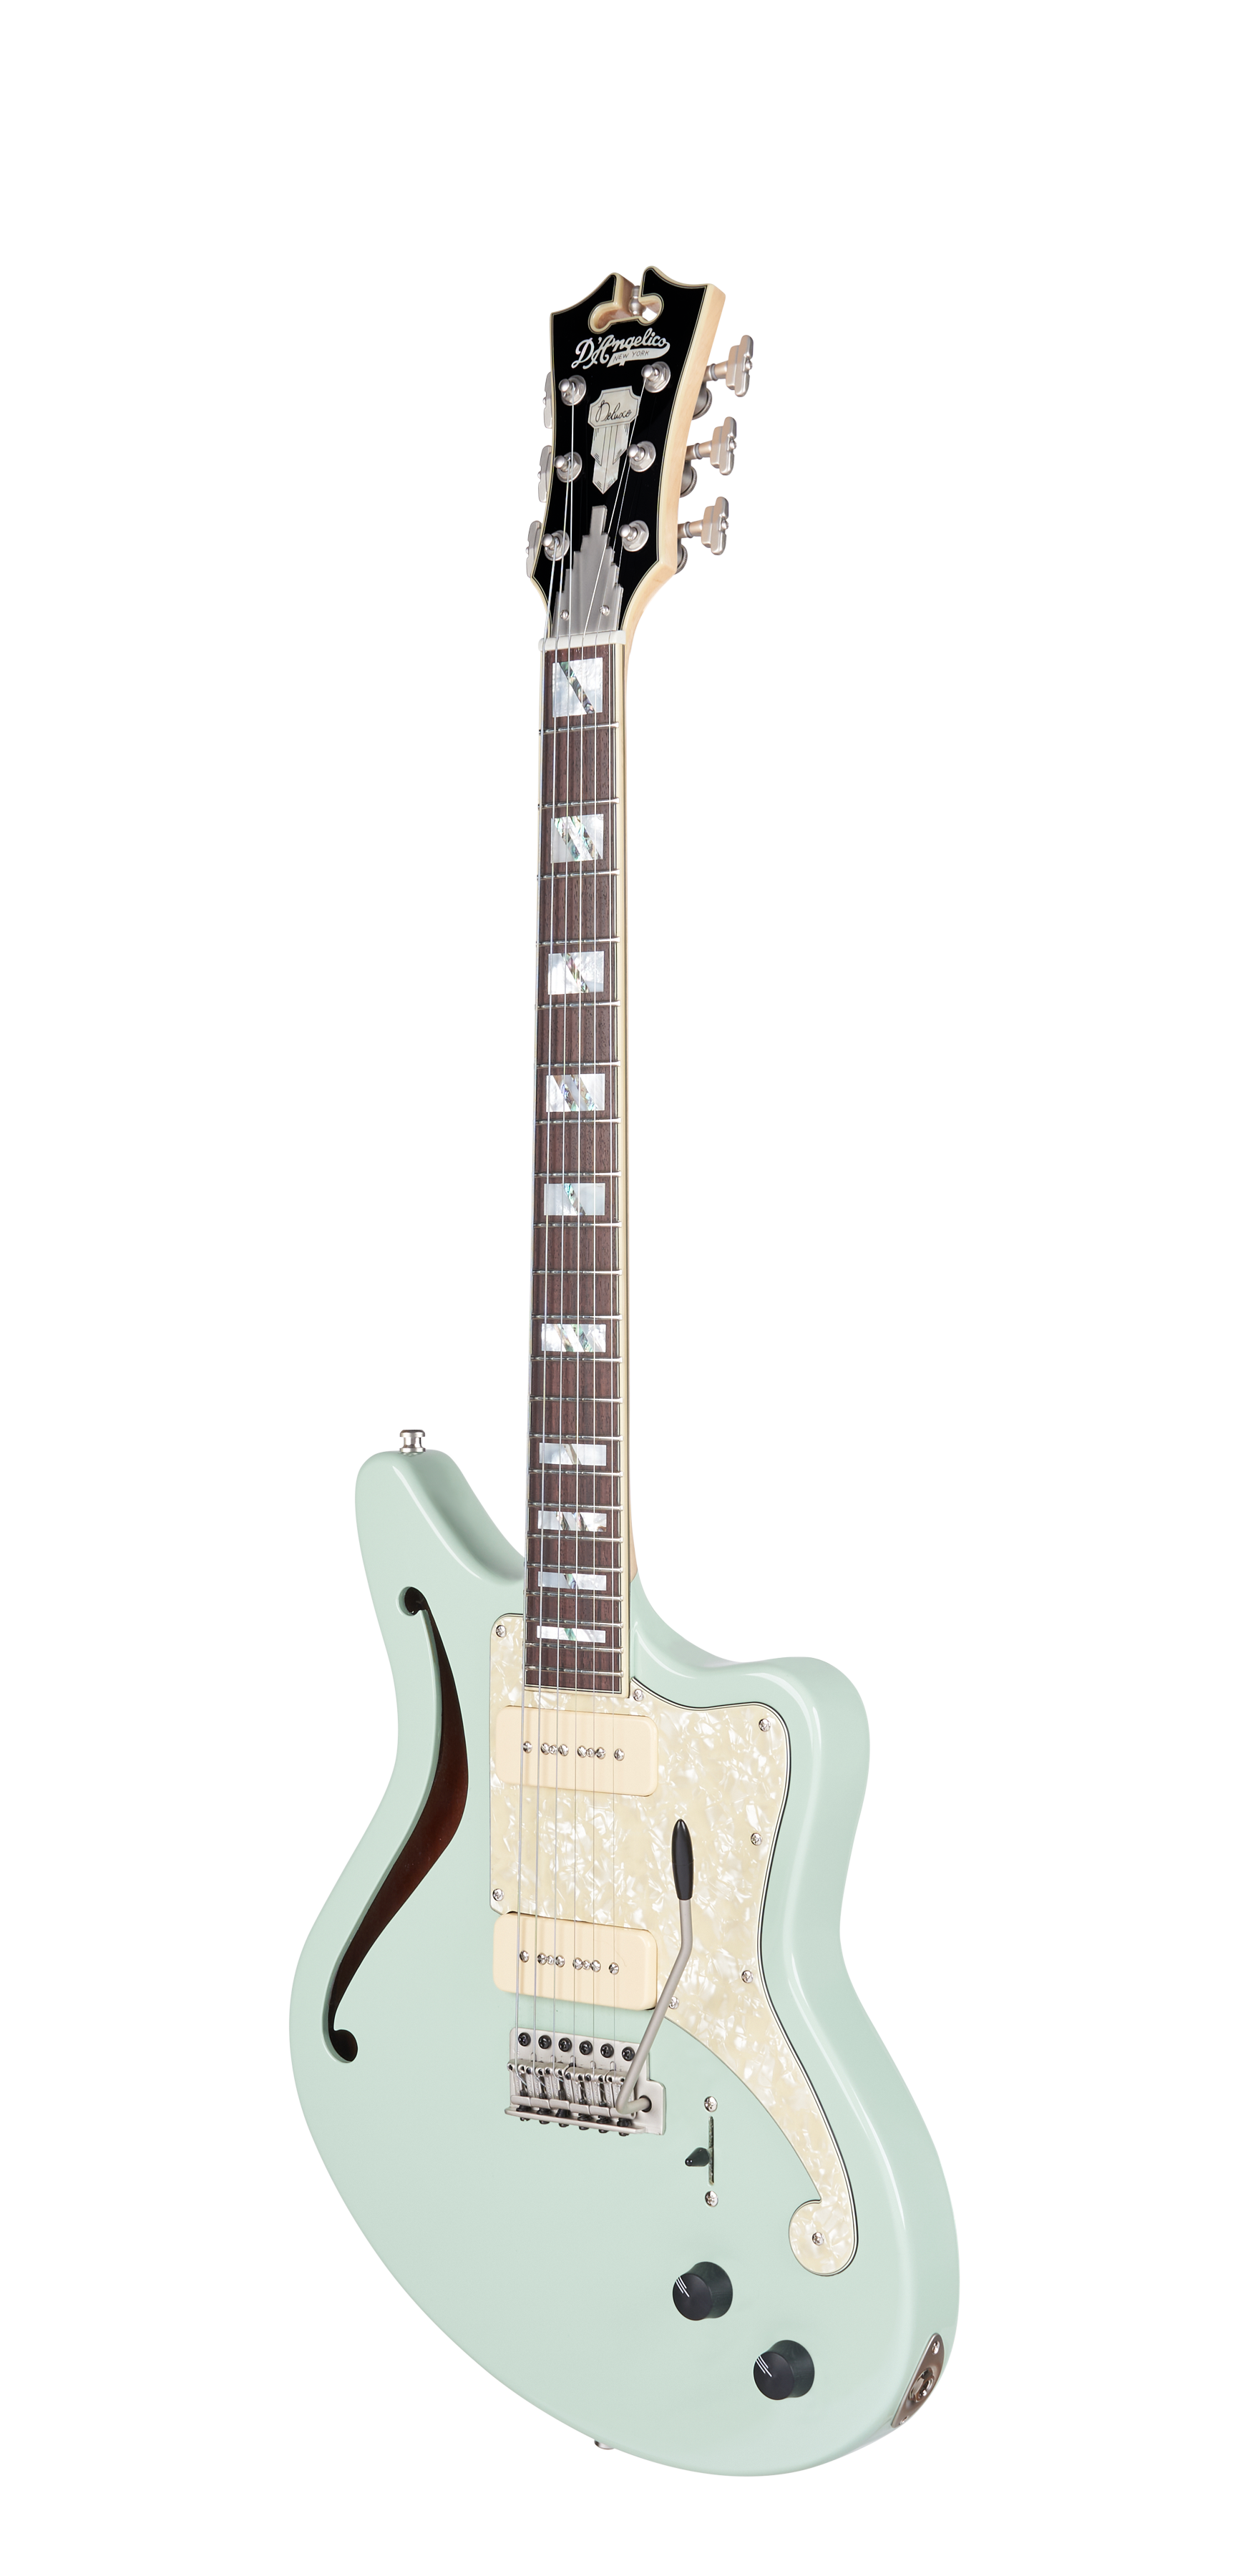 Deluxe Bedford SH LE (Discontinued) - D'Angelico Guitars